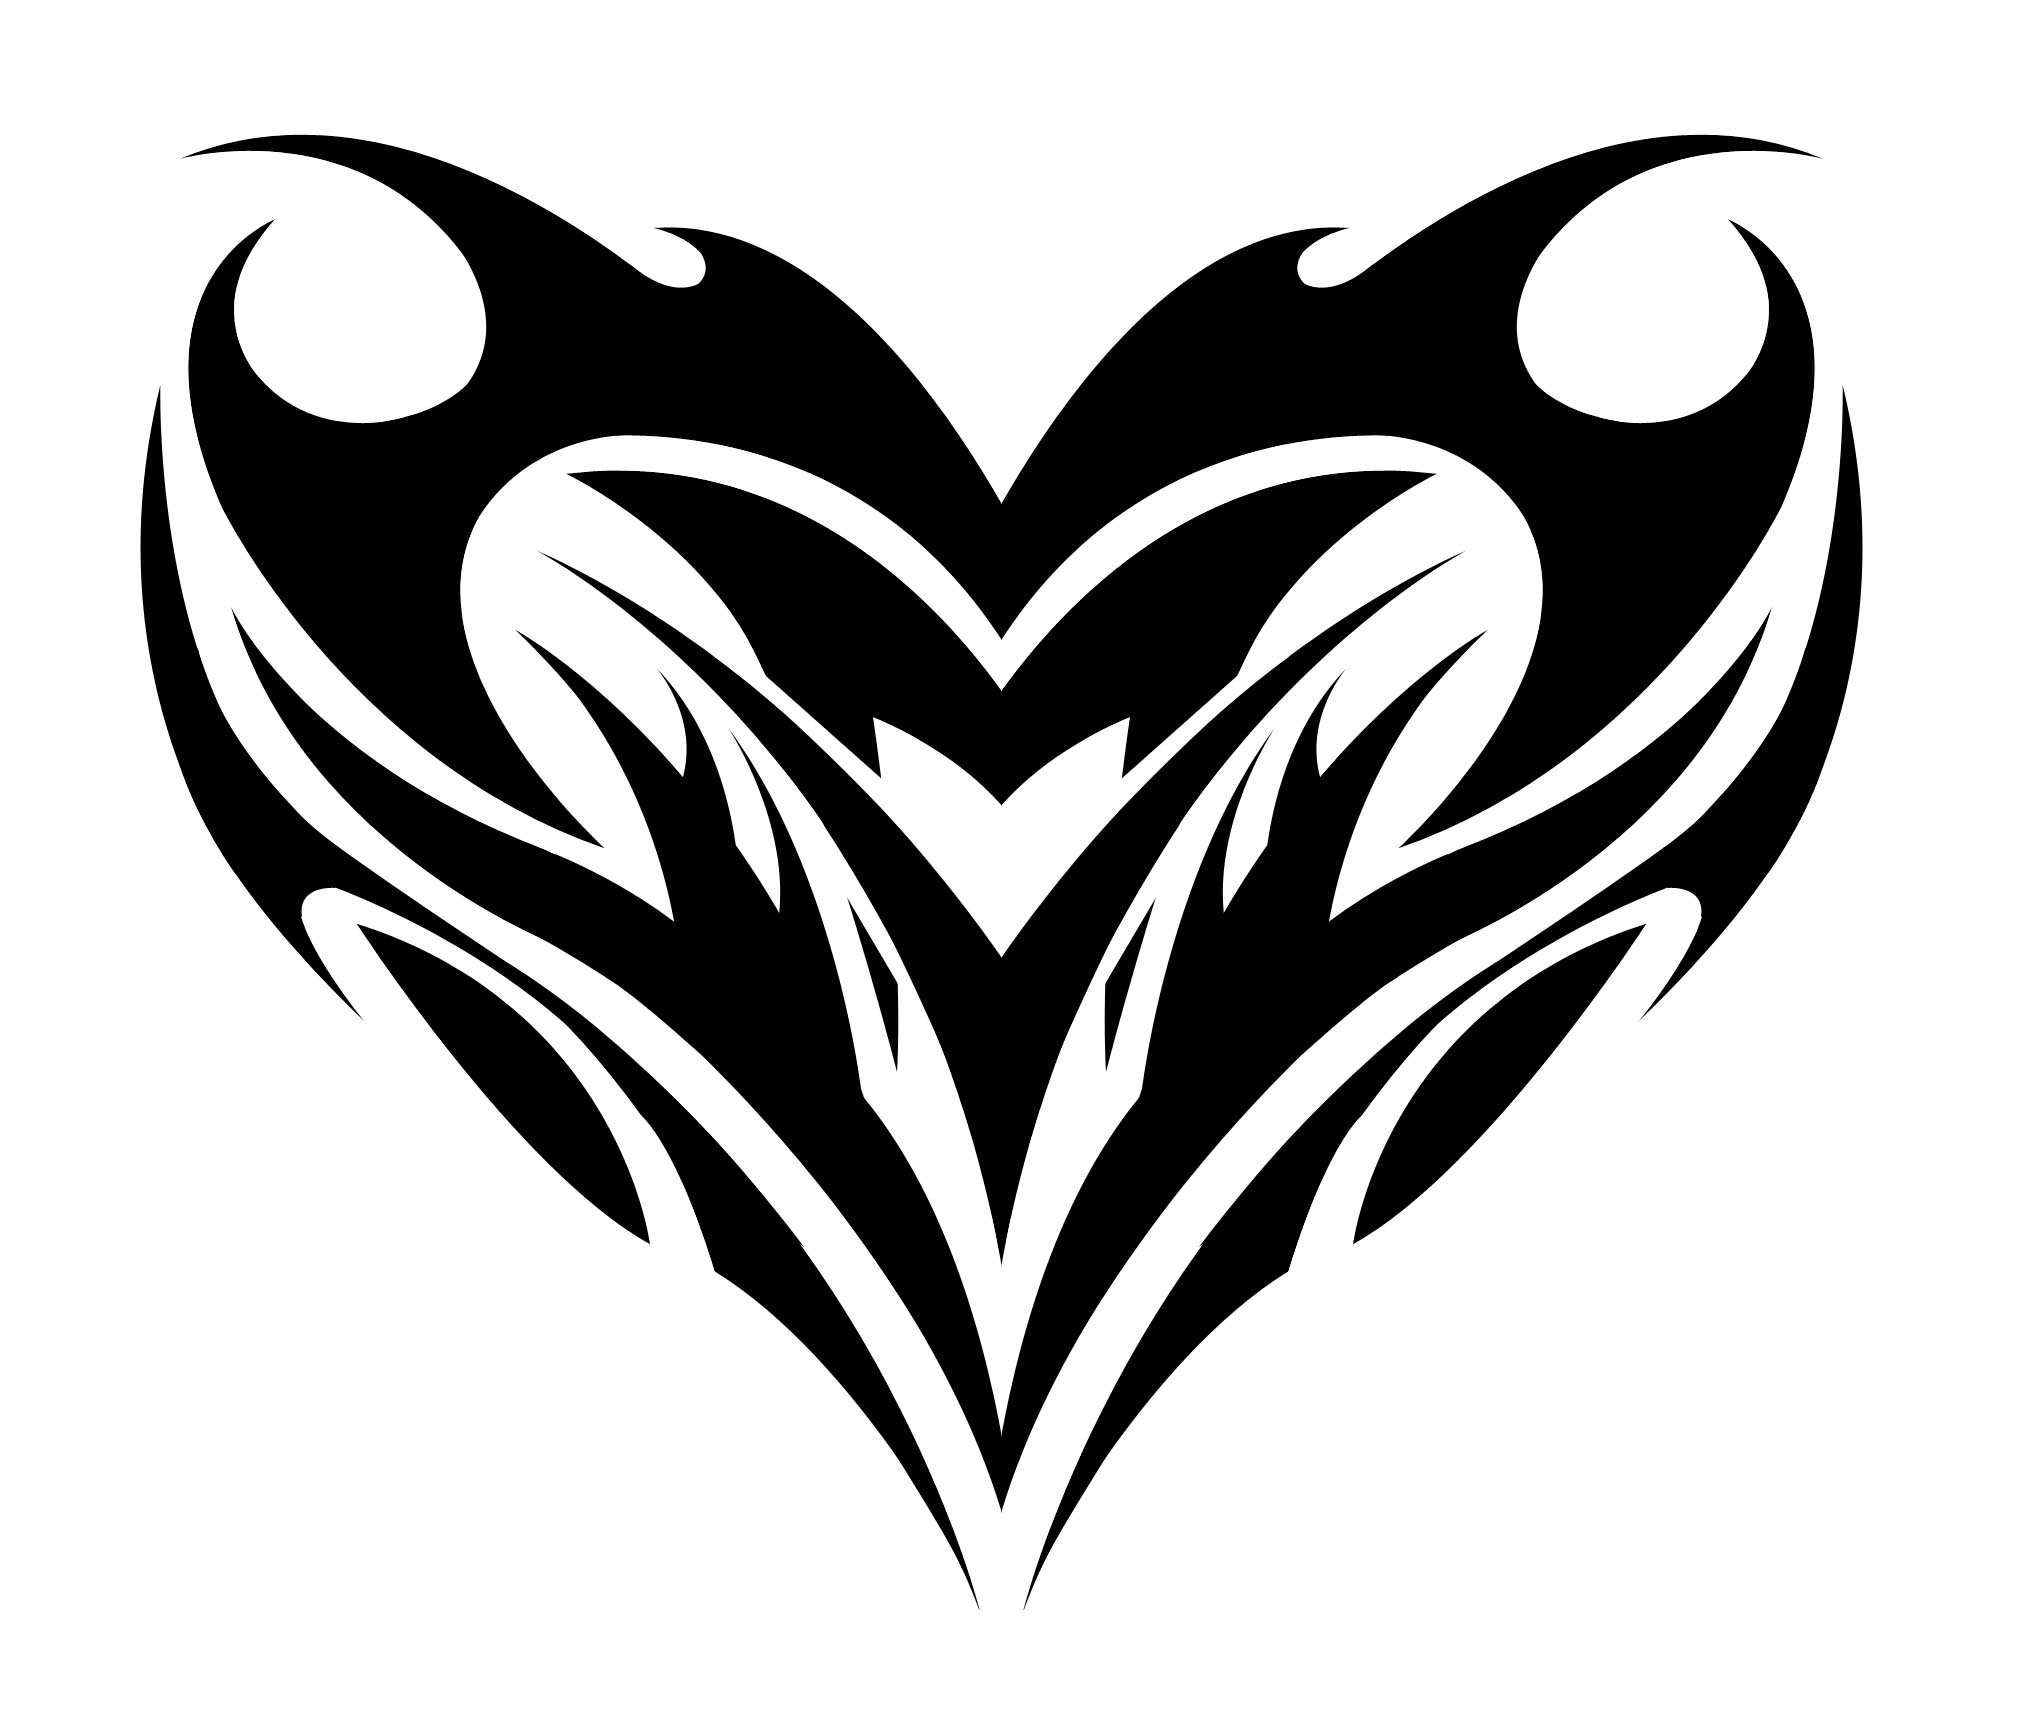 Red And Black Ink Tribal Heart Tattoo Design · Tribal Black Ink Gothic Heart Tattoo Design · Cool Red And Black Ink Tribal Heart Tattoo Design ...